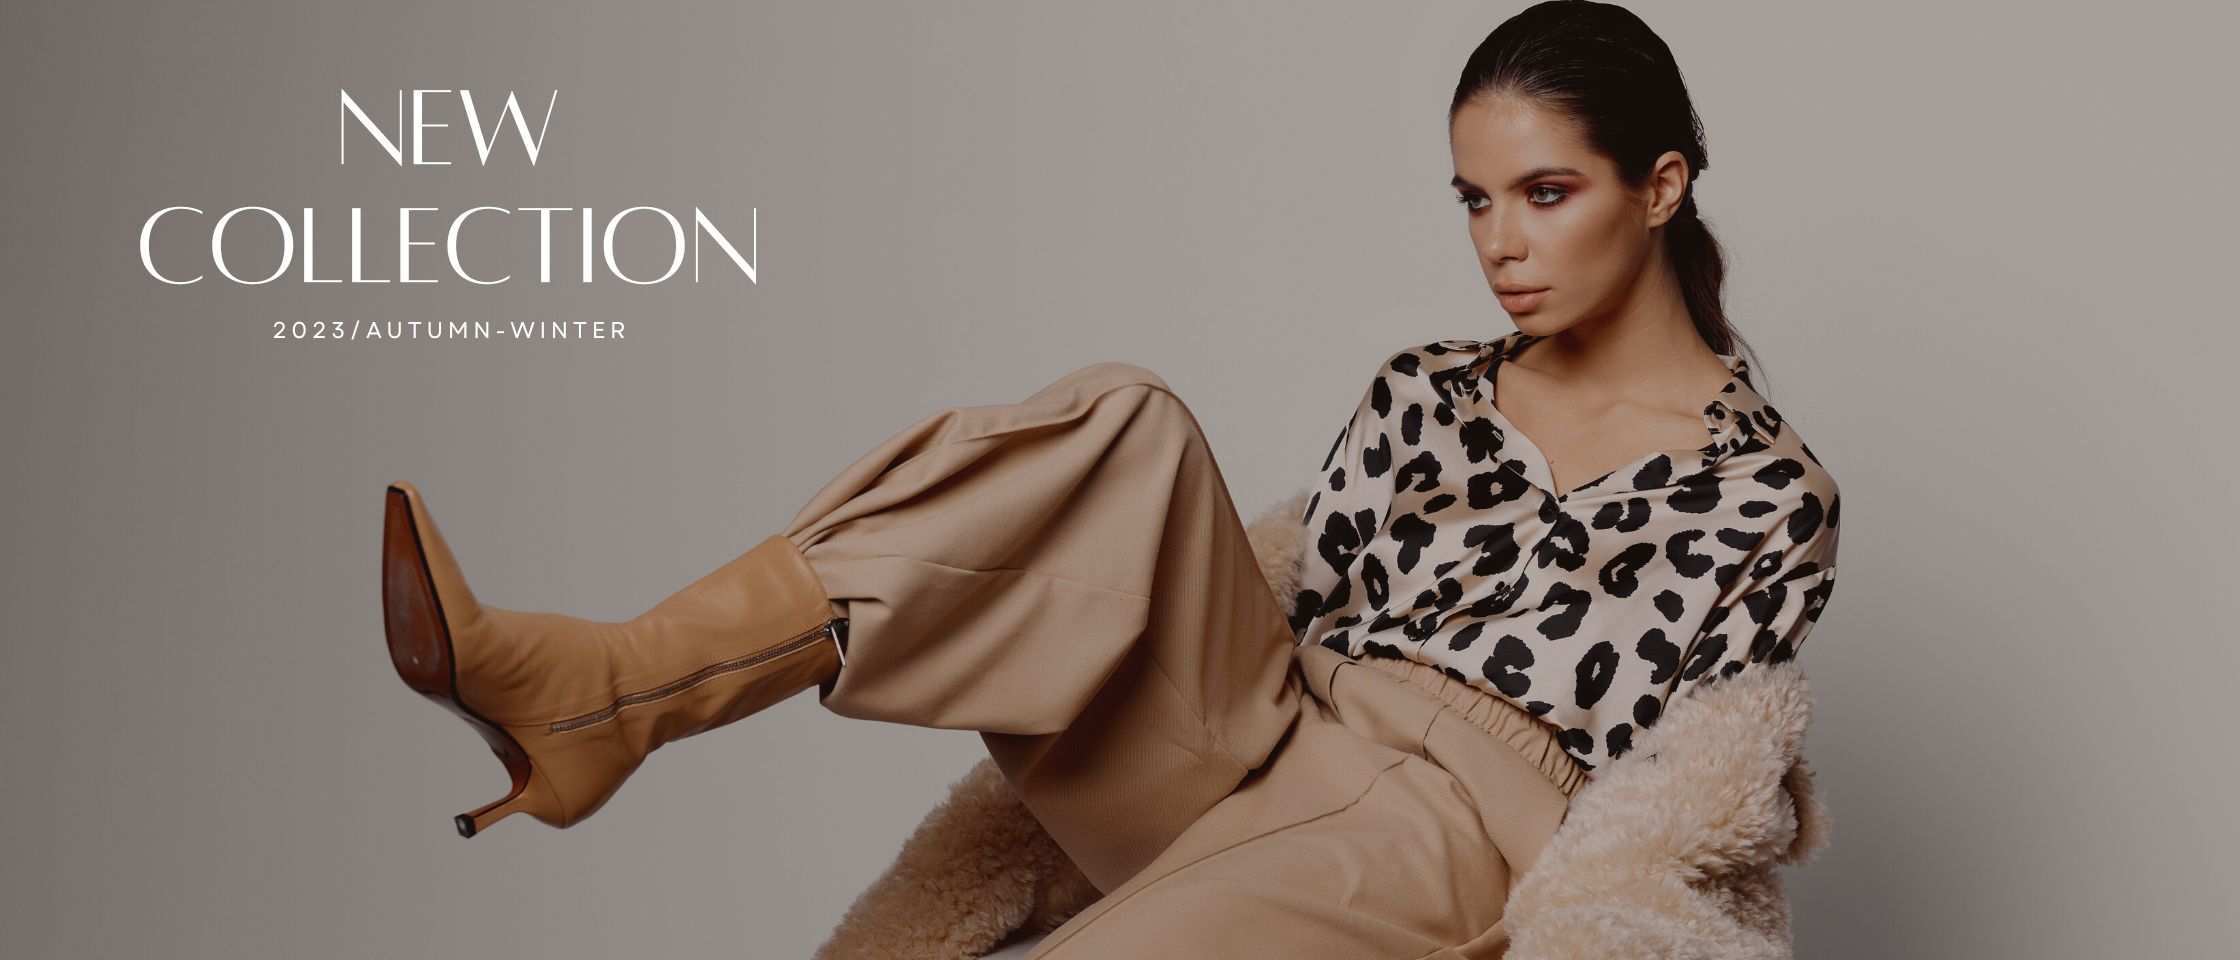 Neutral Minimalist Fashion Collection Business Facebook Cover